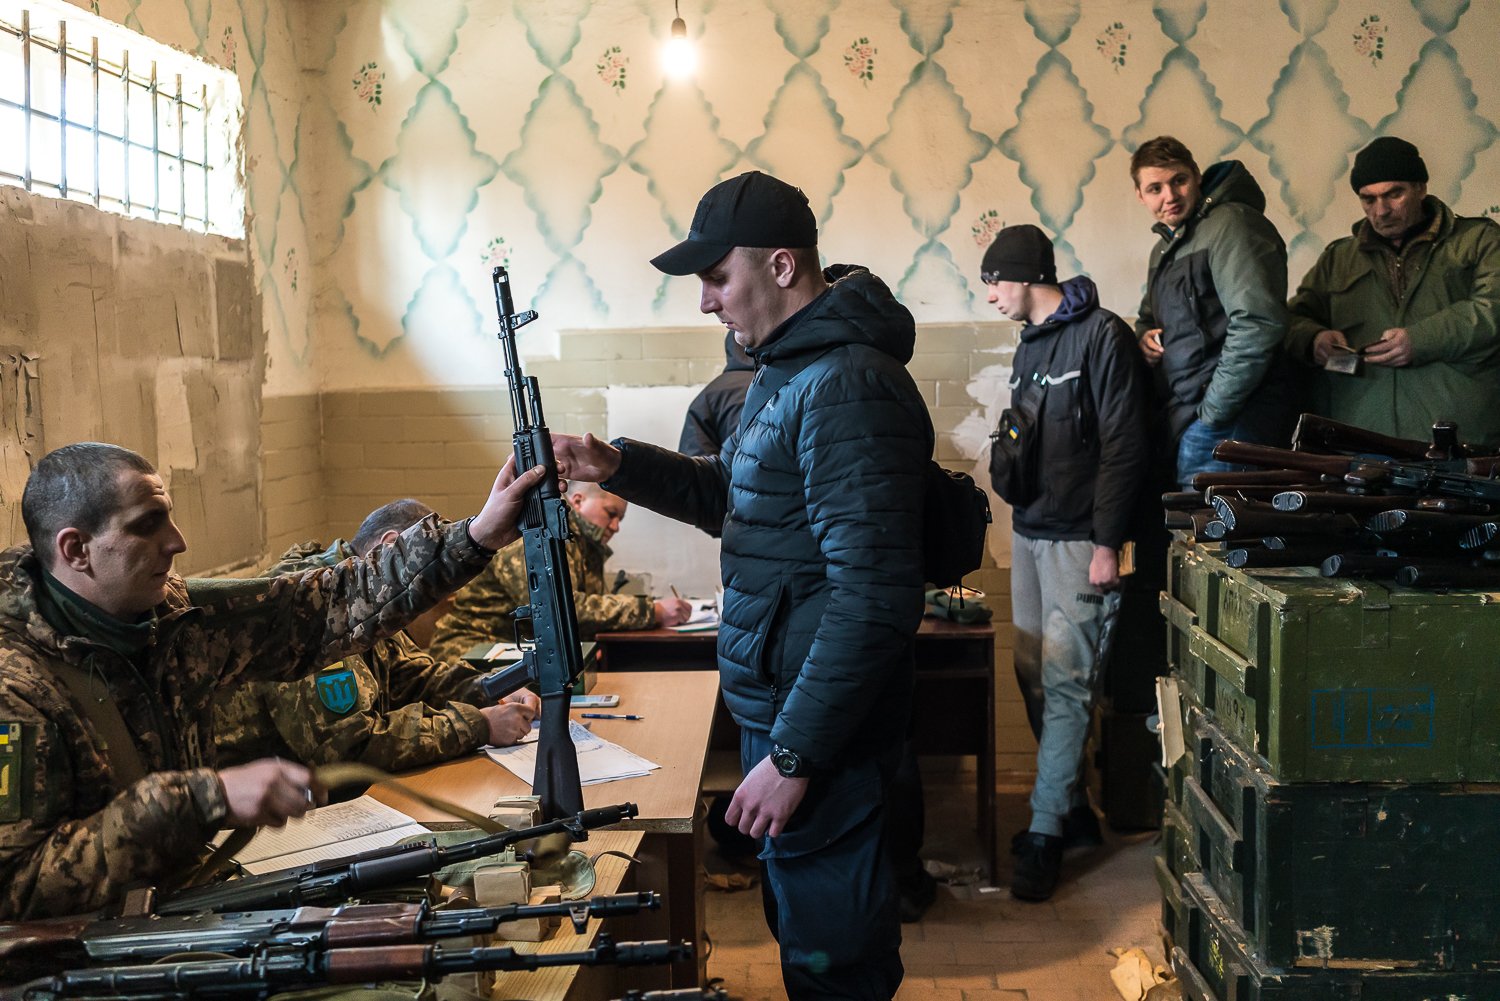  Military volunteers at a weapons storage facility receive weapons after the Ukrainian government announced they would arm civilians to resist the Russian invasion on Friday, February 25, 2022 in Fastiv, Ukraine. 